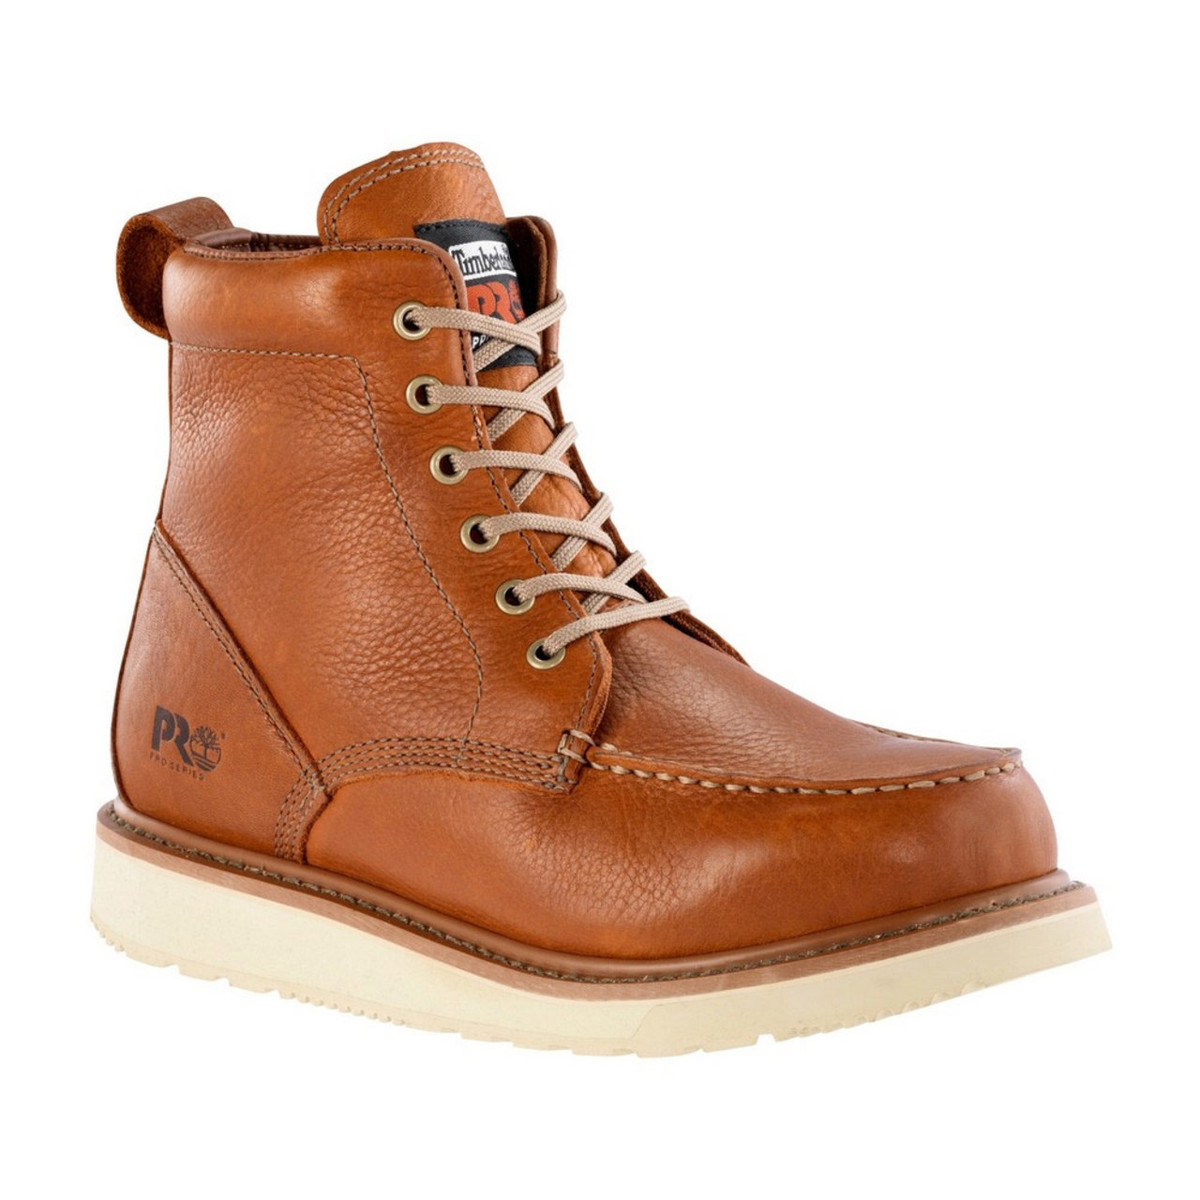 Timberland Men's 6" Wedge Boots - 53009